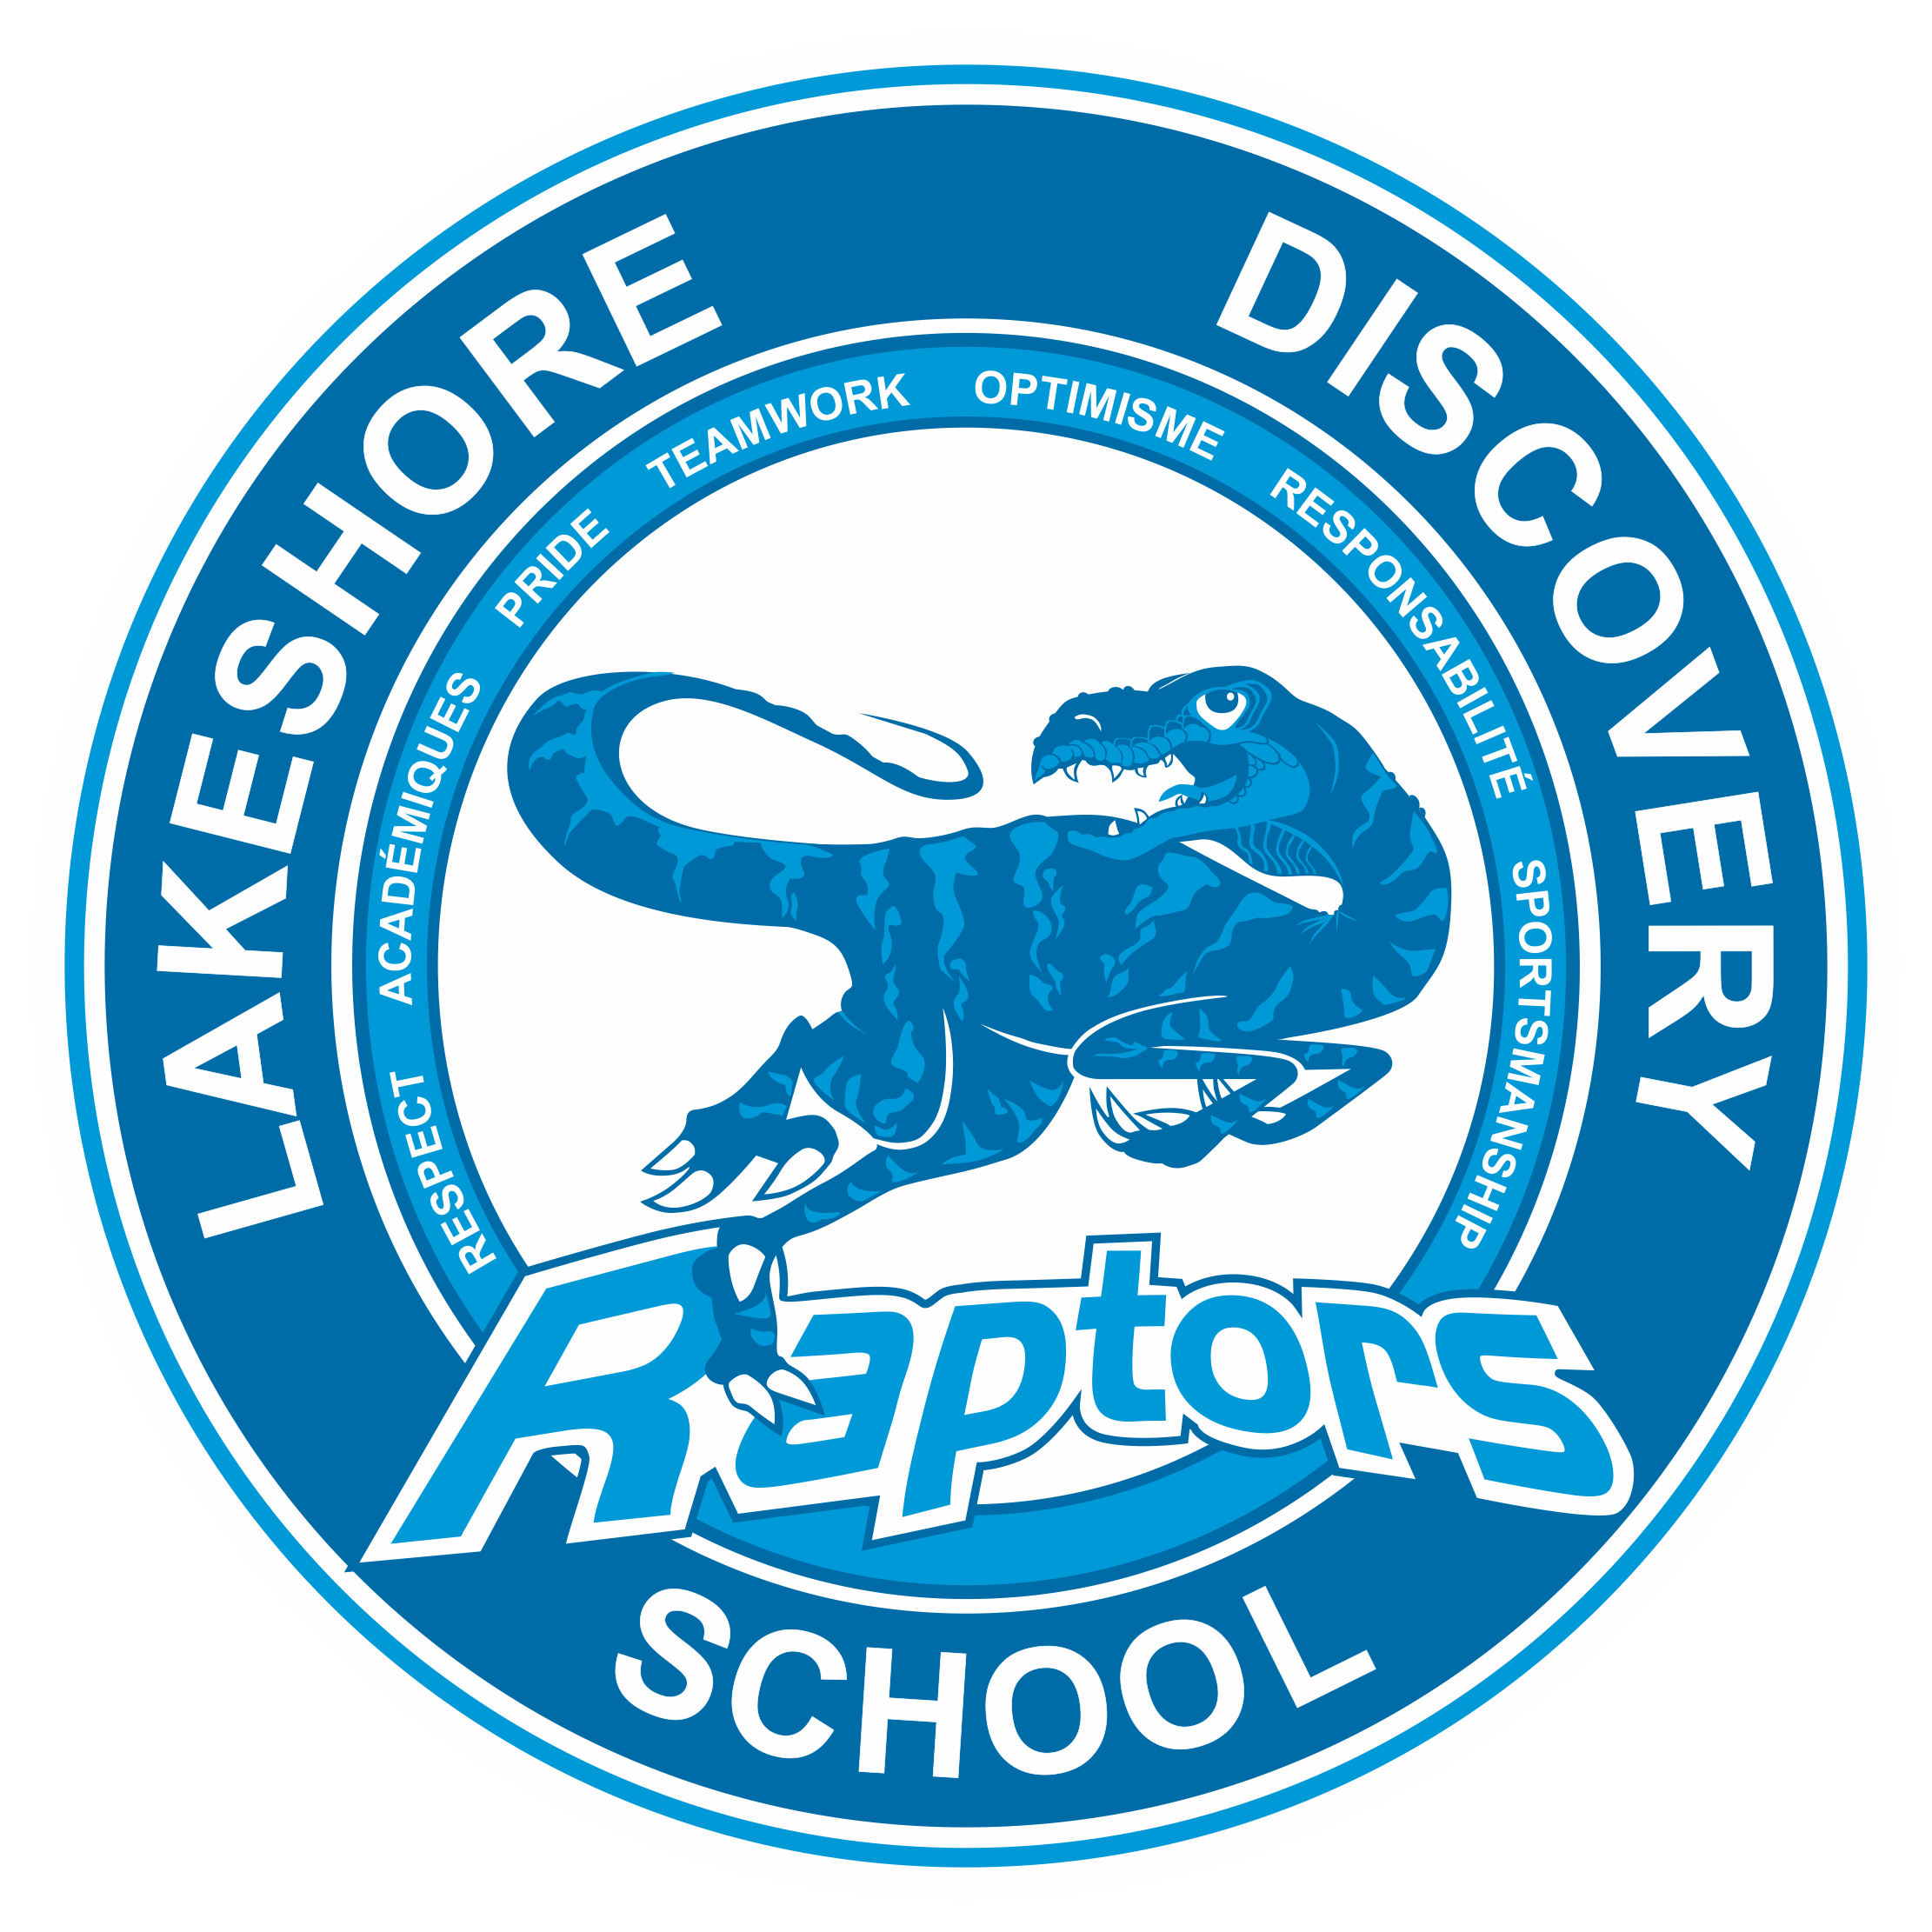 Lakeshore Discovery School footer logo